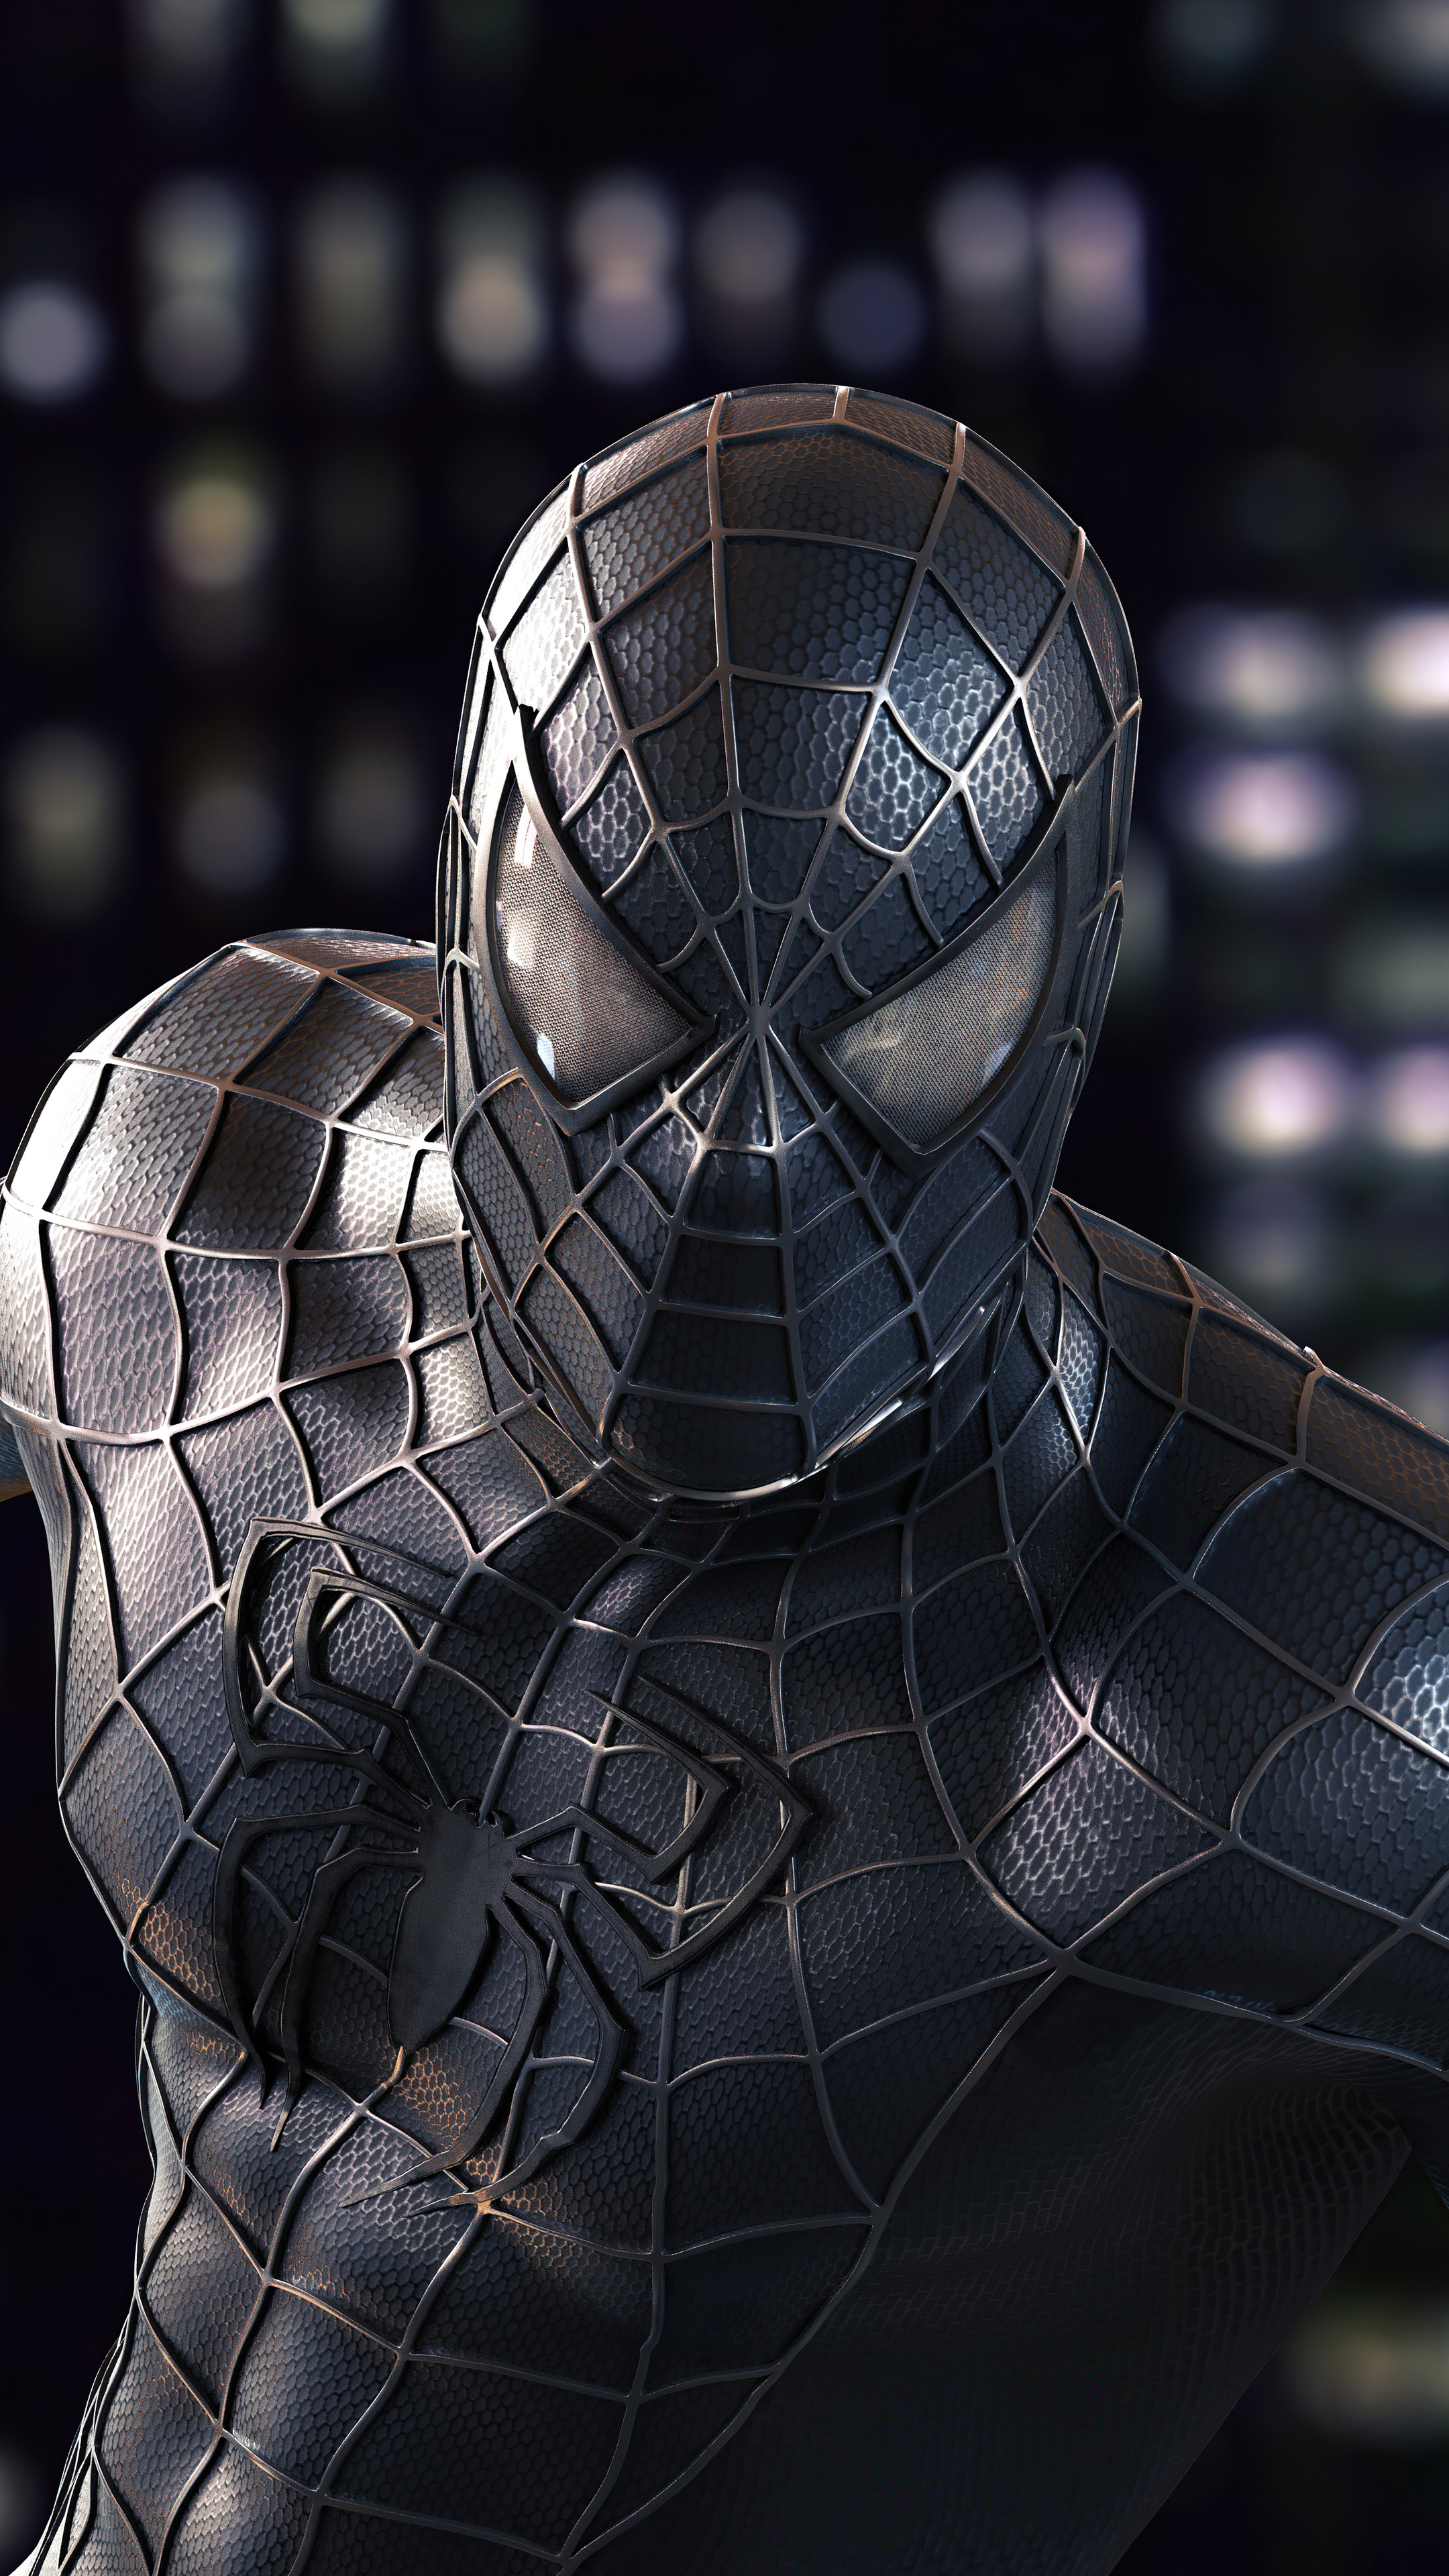 Spider-Man, Black symbiote suit, Sony Xperia wallpapers, HD and 4K images, 2160x3840 4K Phone